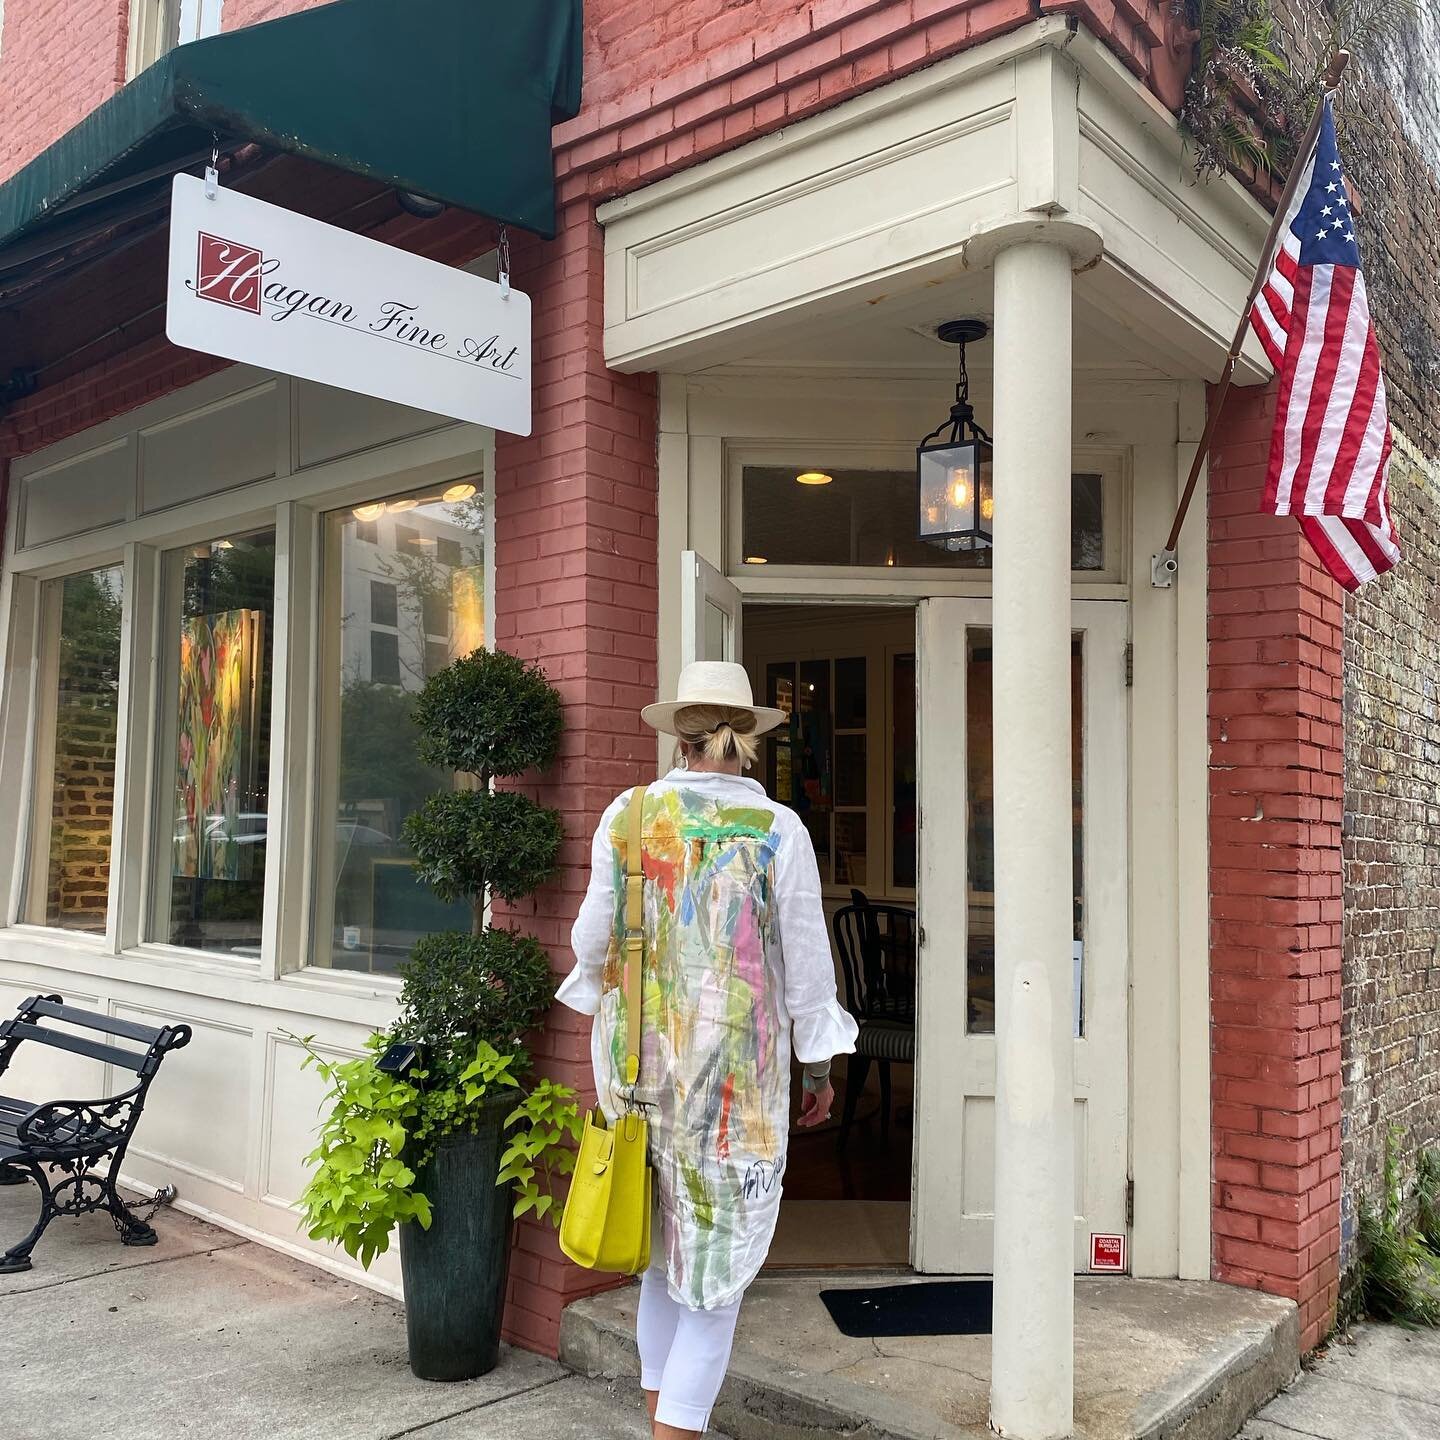 New gallery space is fantastic! Interior pictures to follow tomorrow. Nothing like a building with old exposed brick from the 1800&rsquo;s mixed with modern!! Exquisite. Arrived in Charleston! @haganfineart  And yes, I painted my linen shirt! Stay tu